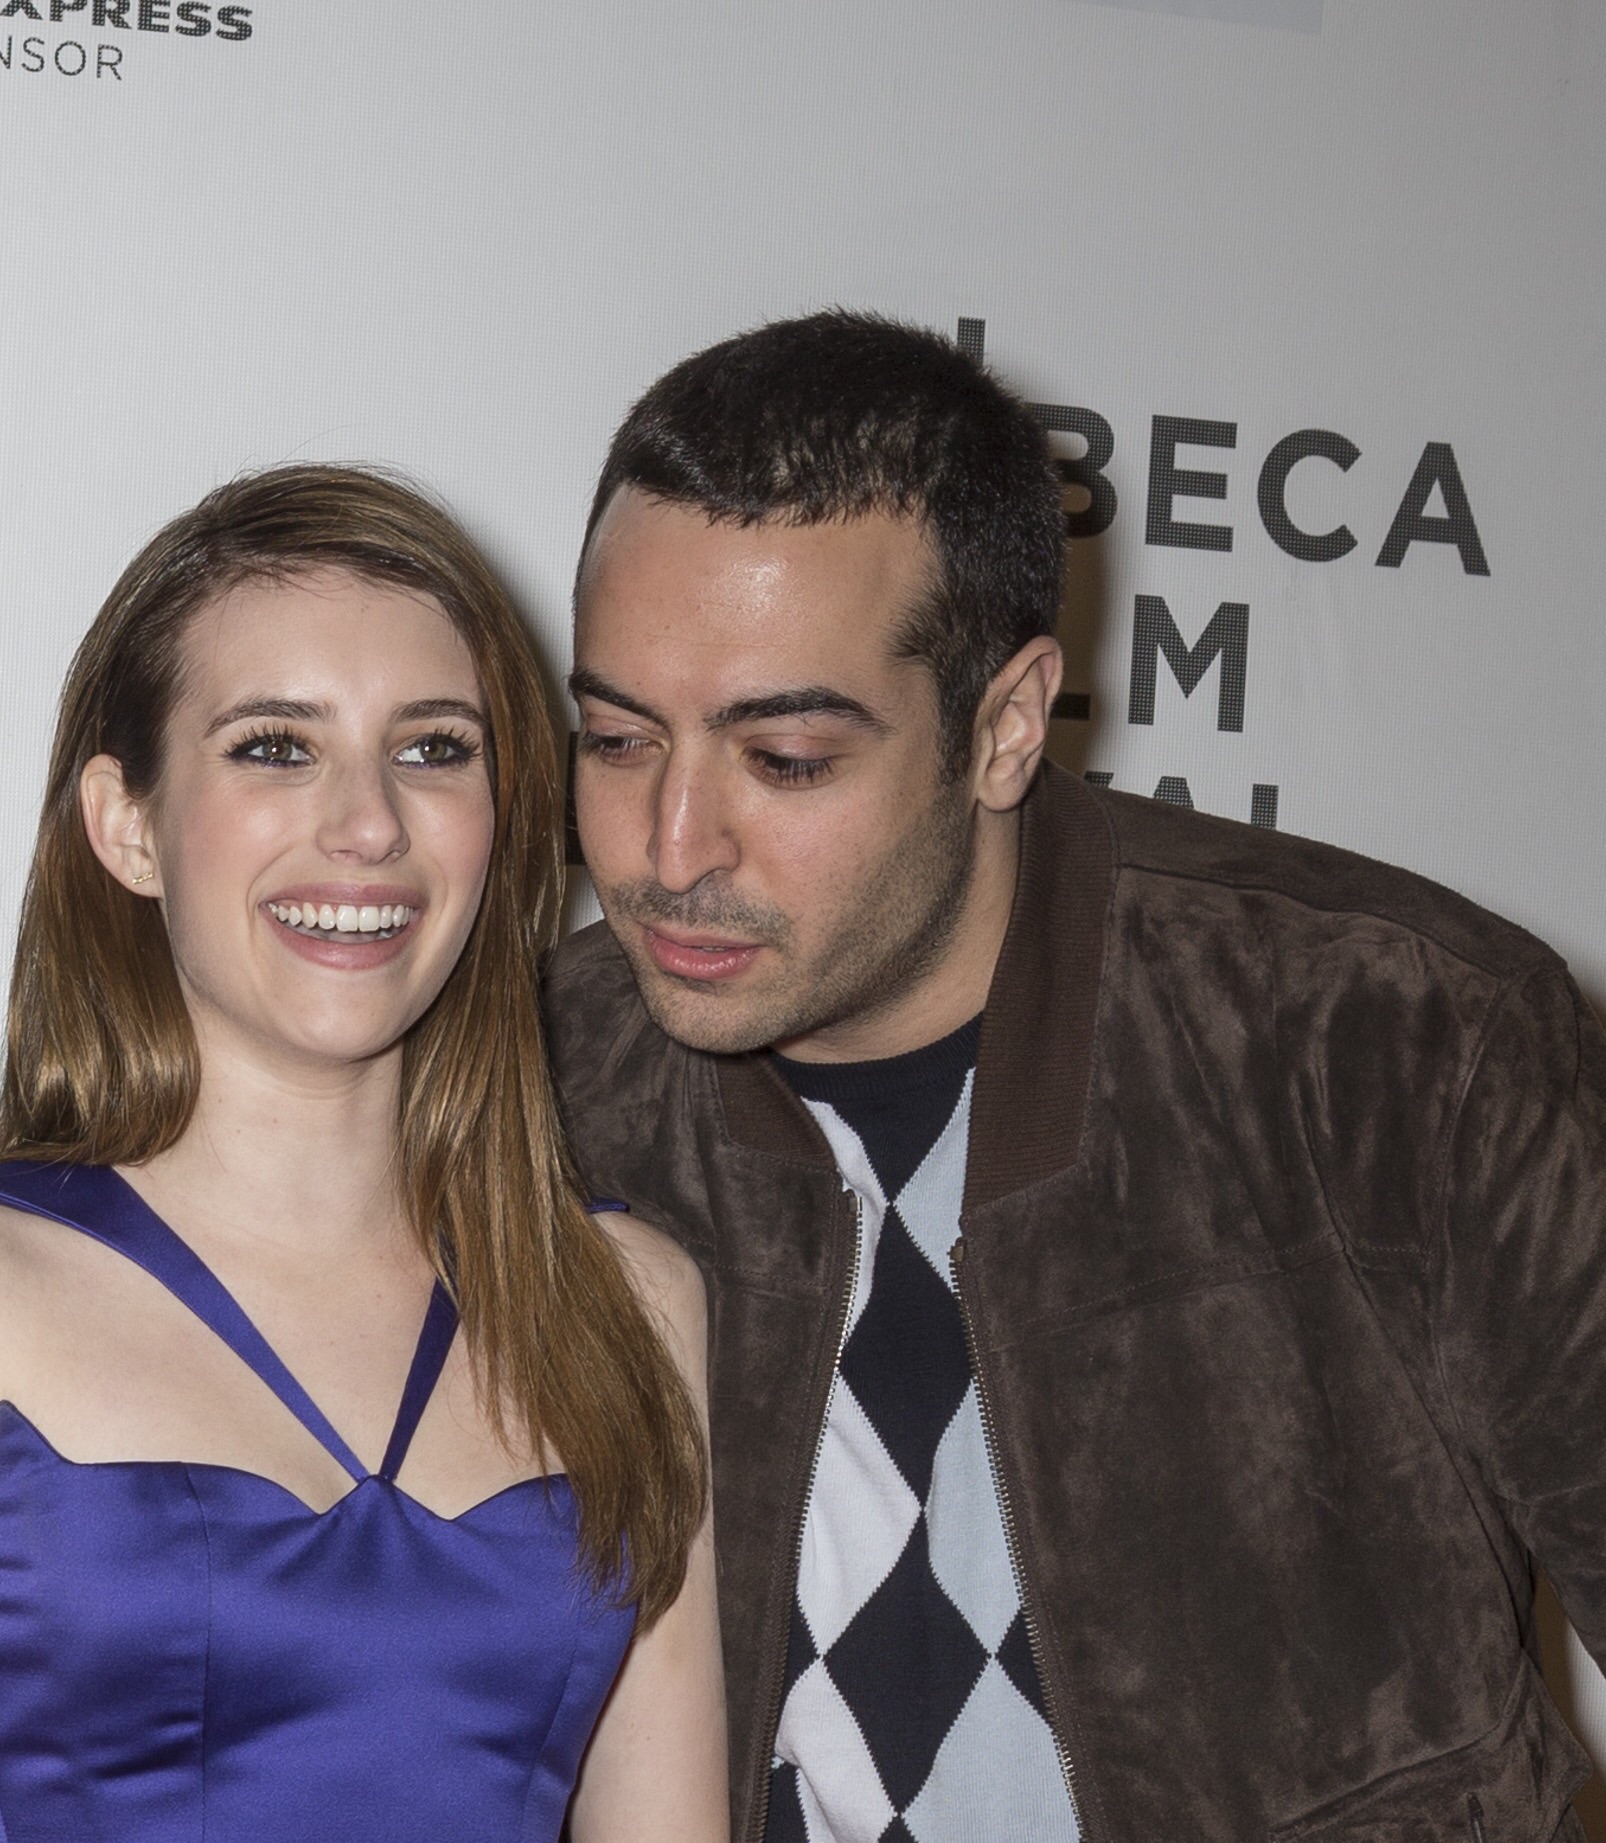 Emma Roberts and Mohammed Al Turki attend the 'Adult World' World Premiere during the 2013 Tribeca Film Festival on April 18, 2013 in New York City.